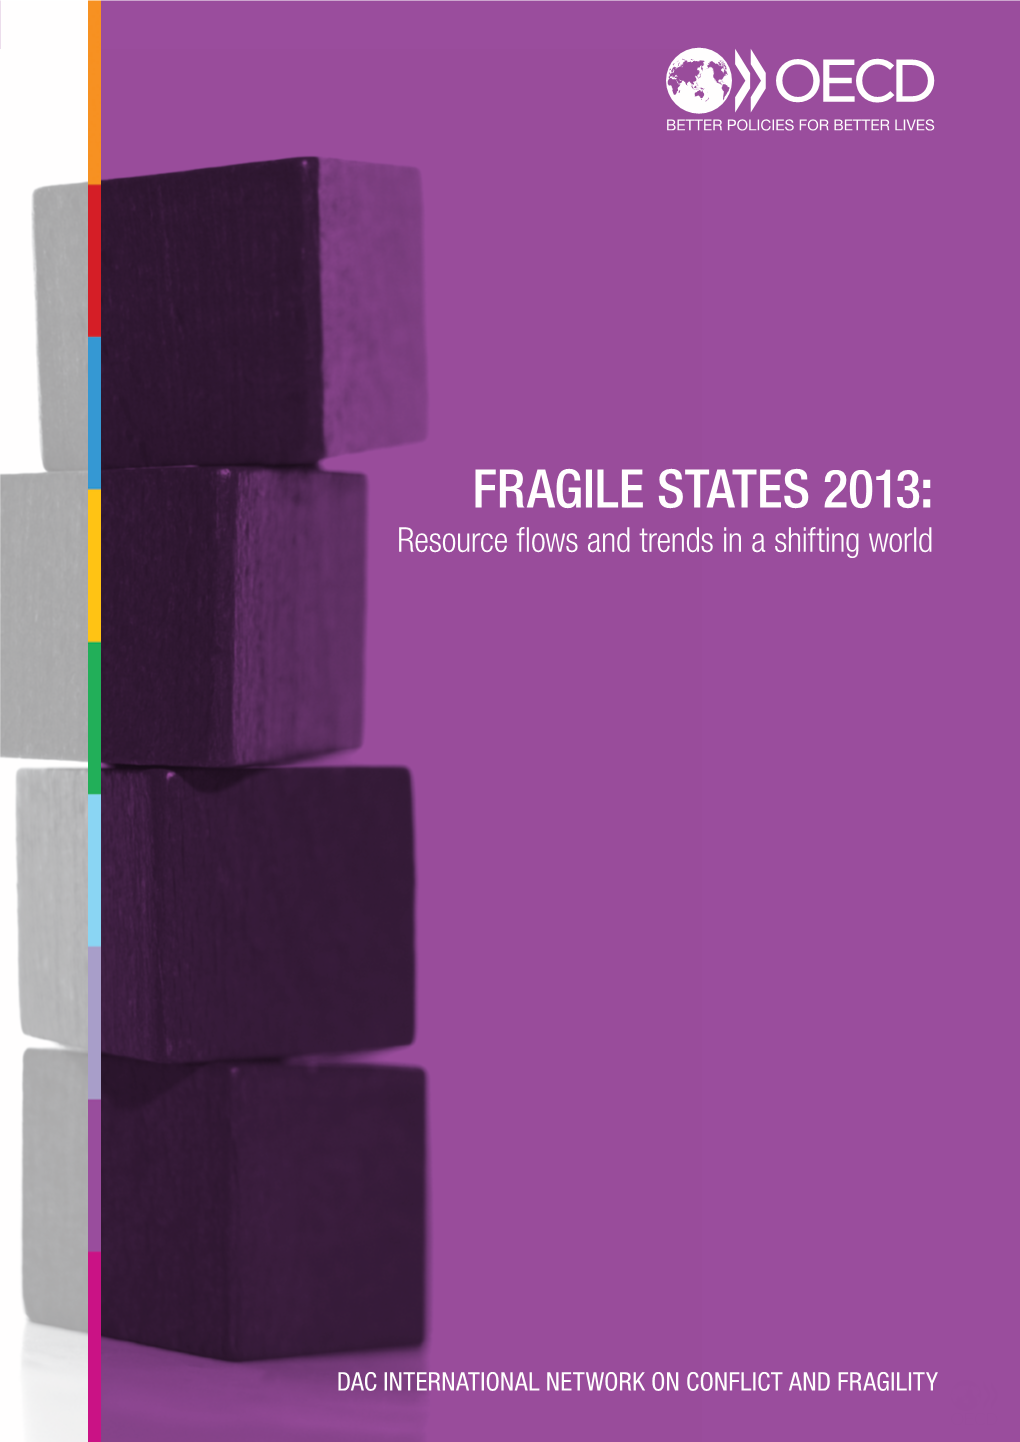 FRAGILE STATES 2013: Resource Flows and Trends in a Shifting World